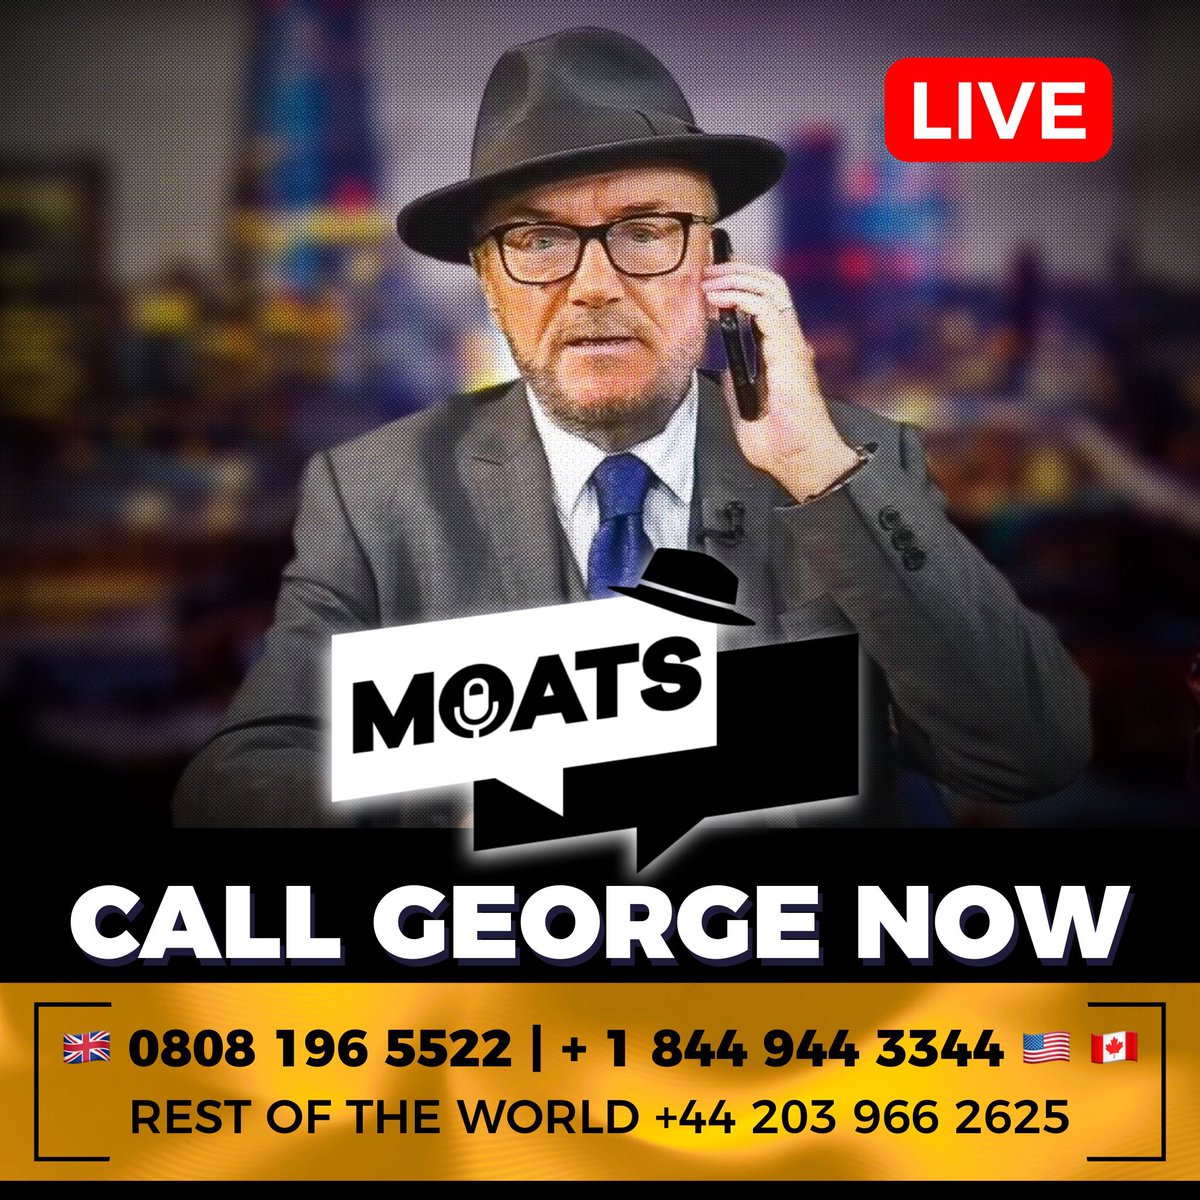 🚨🚨#LIVE The Mother Of All Talk Shows is ON AIR now! Call #MOATS TOLL FREE worldwide! 🇬🇧 🇮🇪 0808 196 5522 🇺🇸 🇨🇦 +1 844 944 3344 🌎 +44 203 966 2625 🟥 youtube.com/live/NK_i2gwBG… 🟩 rumble.com/v4uxbke-moats-…